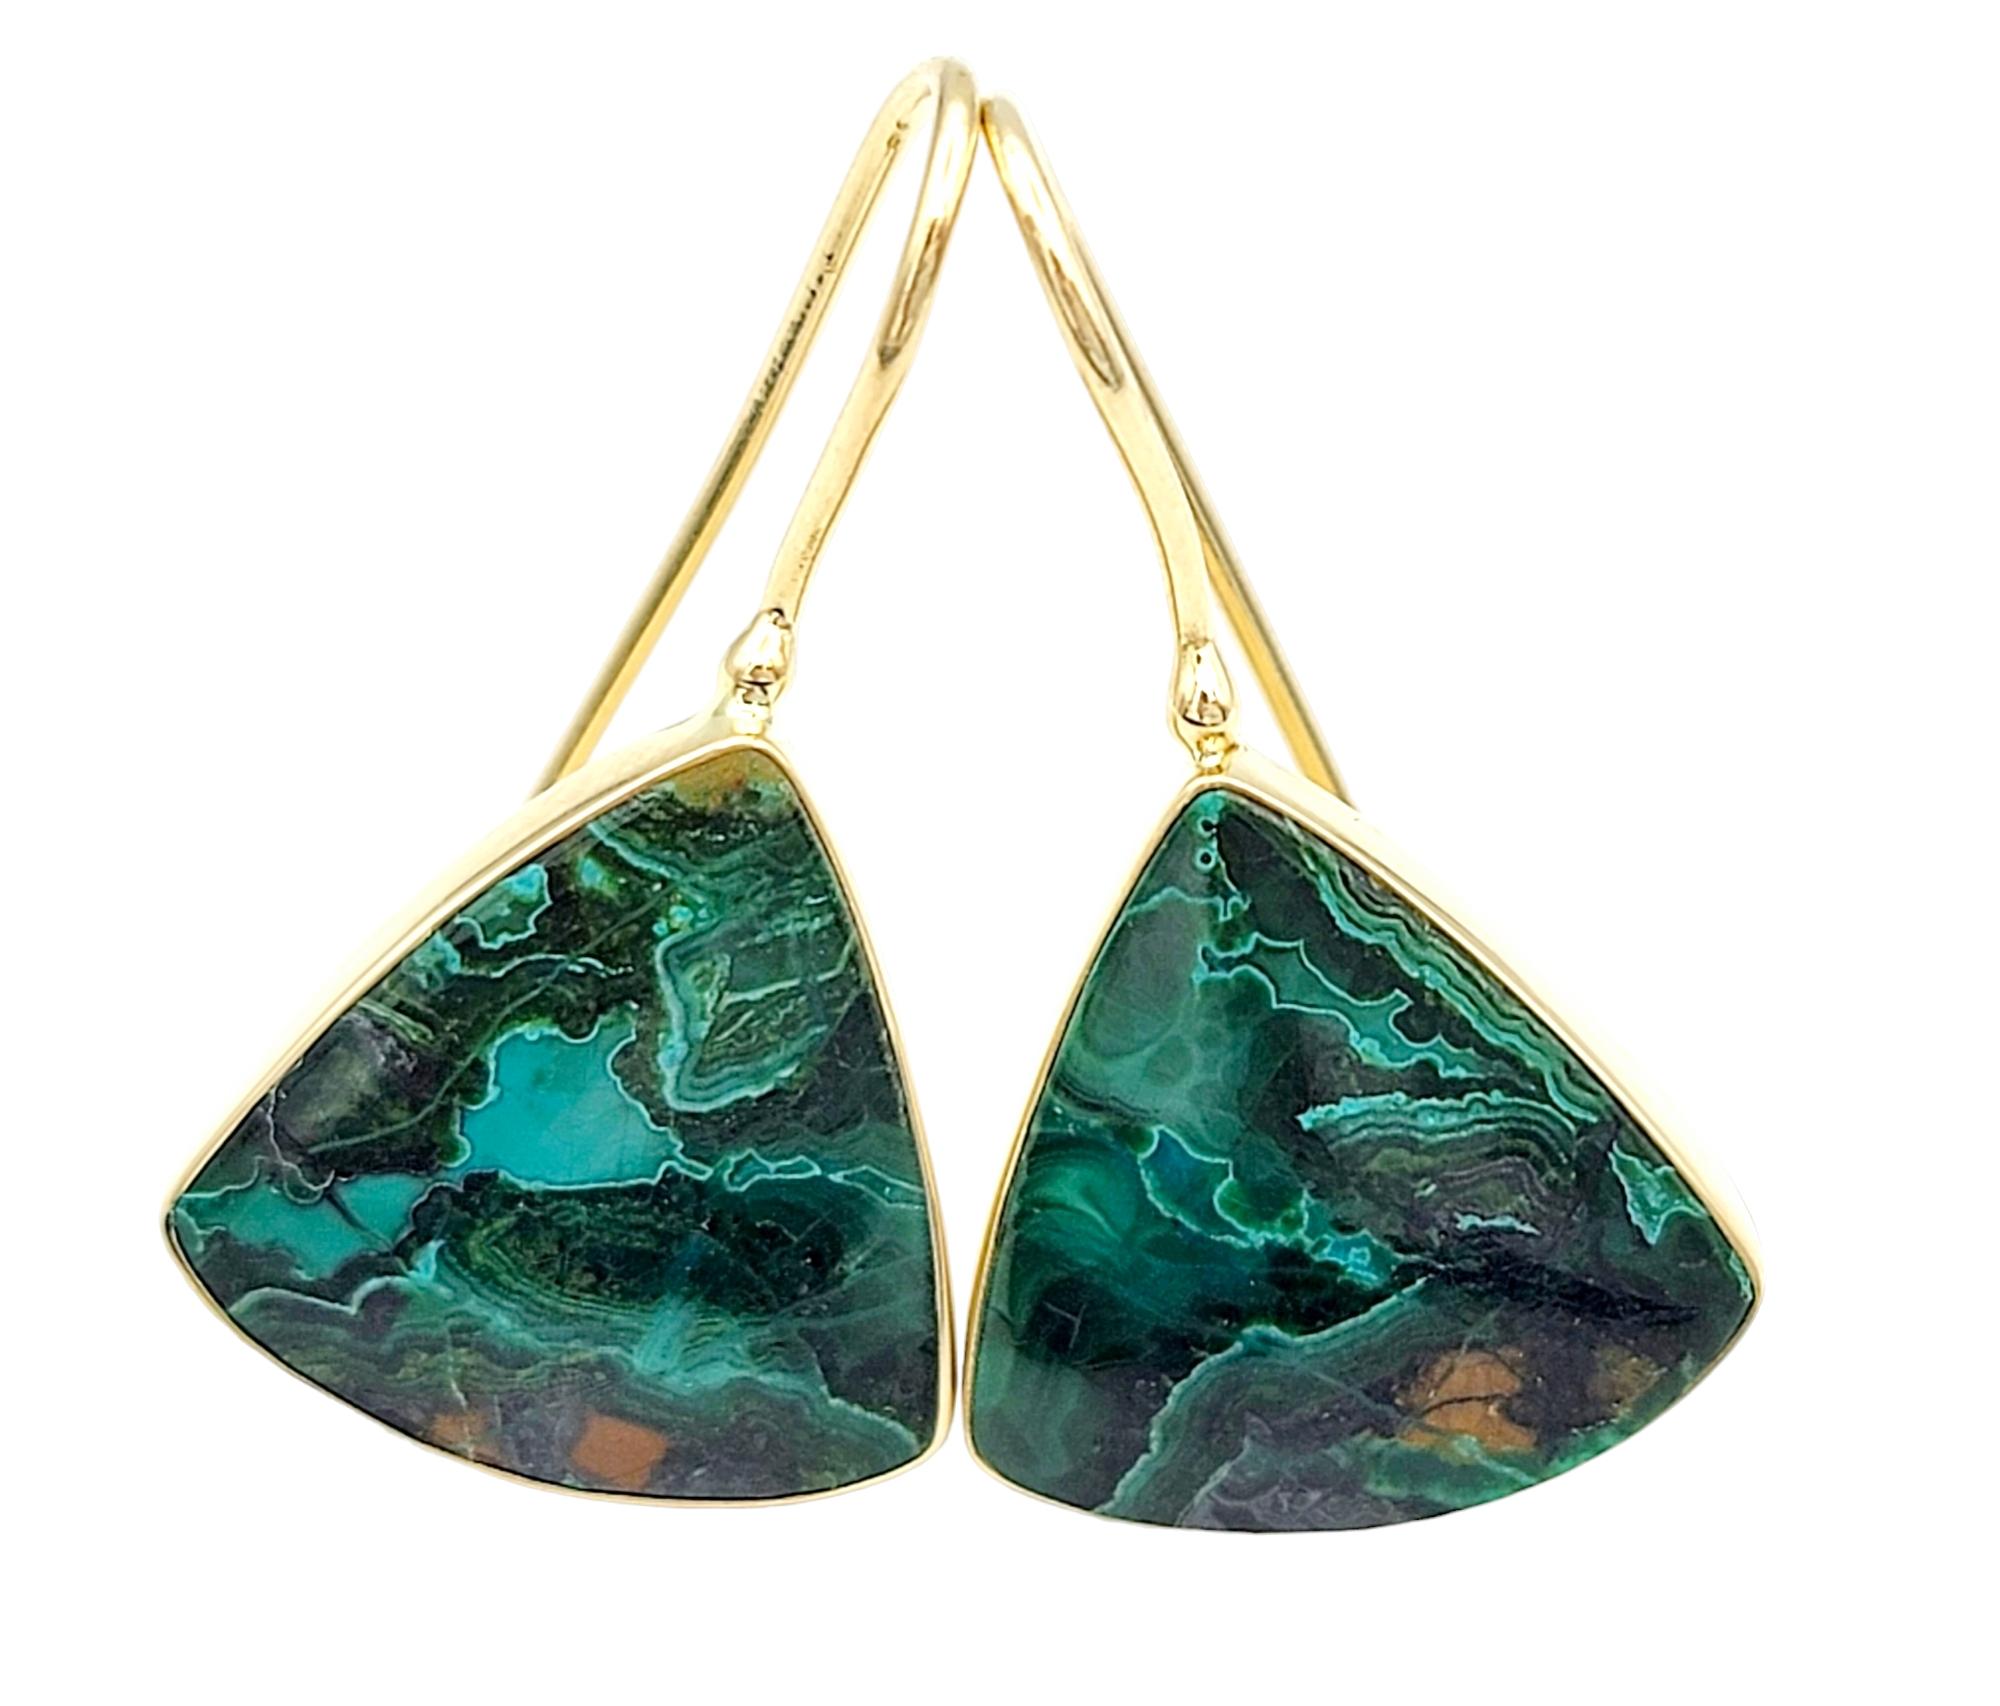 These green malachite gemstone earrings are a true testament to nature's beauty, elegantly captured in a rounded triangular shape and cradled within exquisite 14 karat yellow gold bezel settings. The combination of rich, forest-green malachite and